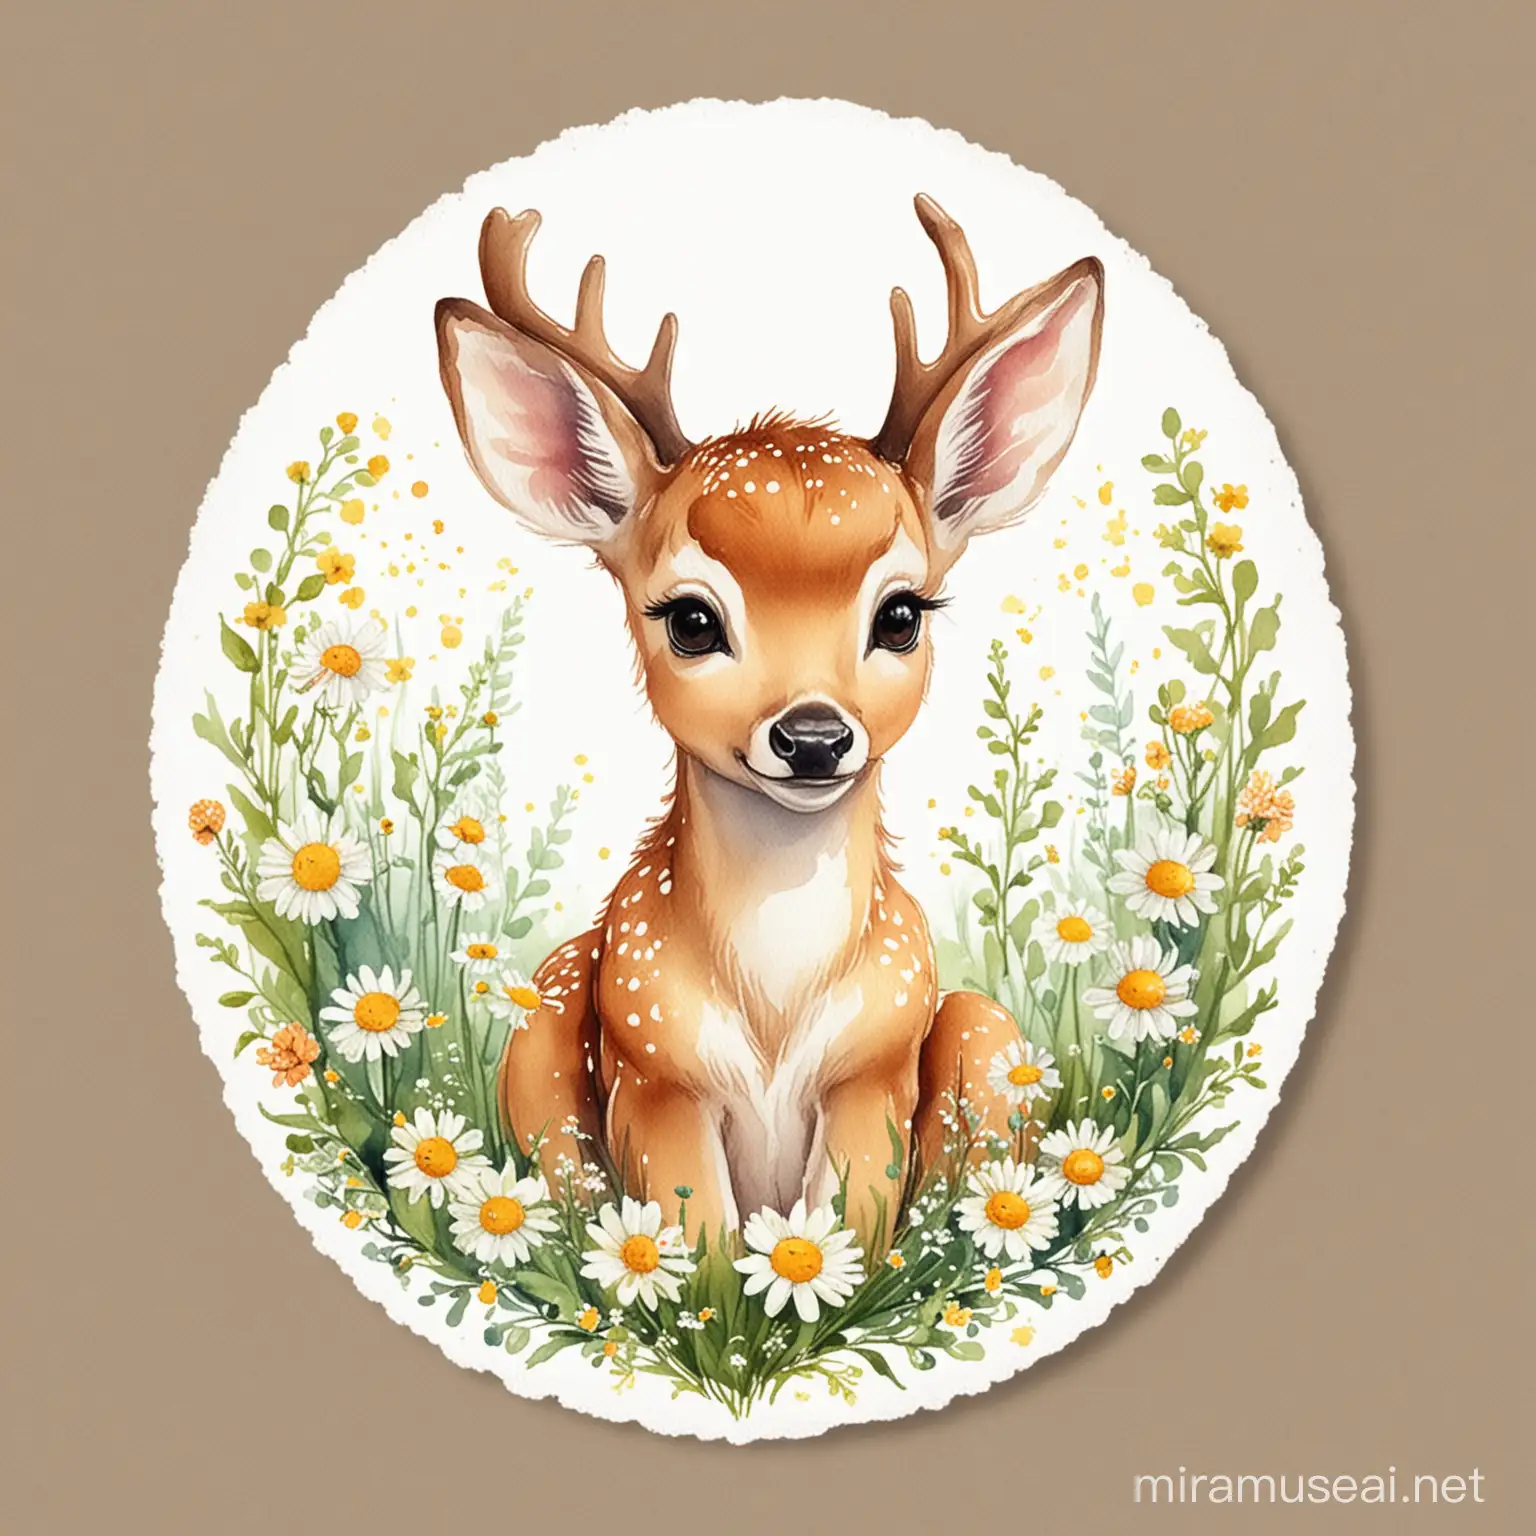 Adorable Deer Baby Surrounded by Daisy Flowers HighQuality Watercolor Illustration Sticker